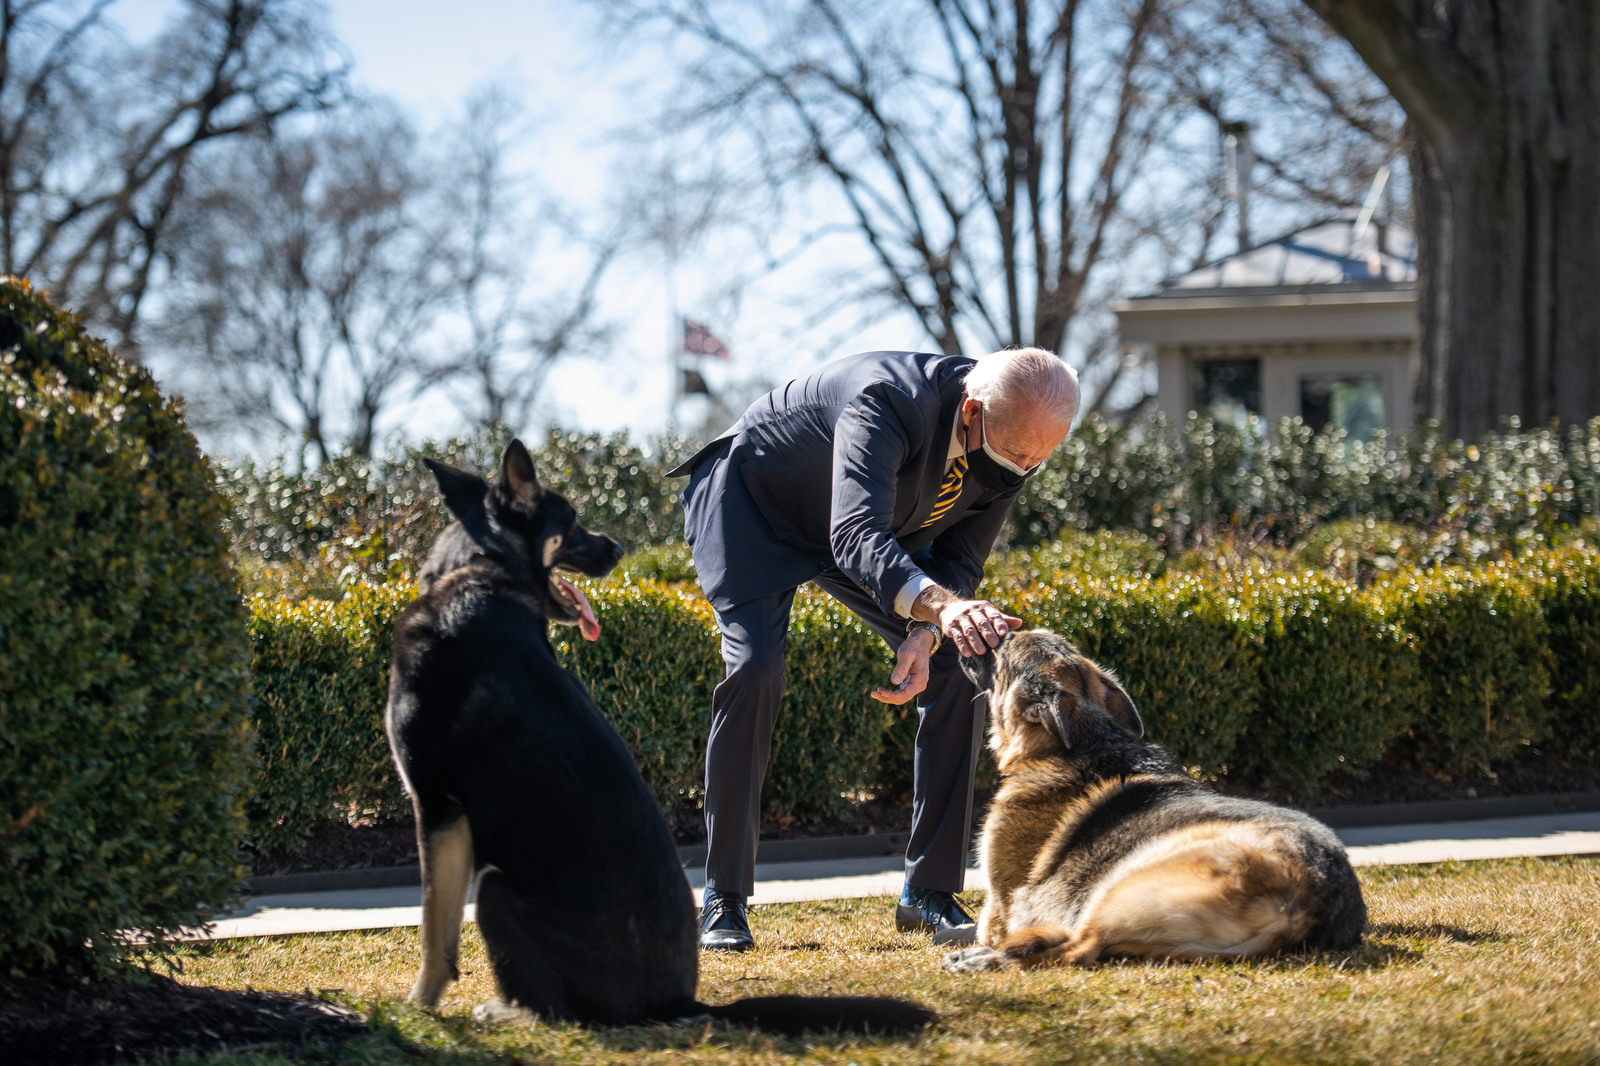 PHOTO: President Joe Biden plays with the Biden family dogs Champ, right, and Major, left, on Feb. 9, 2021 at the White House on Feb. 24, 2021 in Washington, D.C.